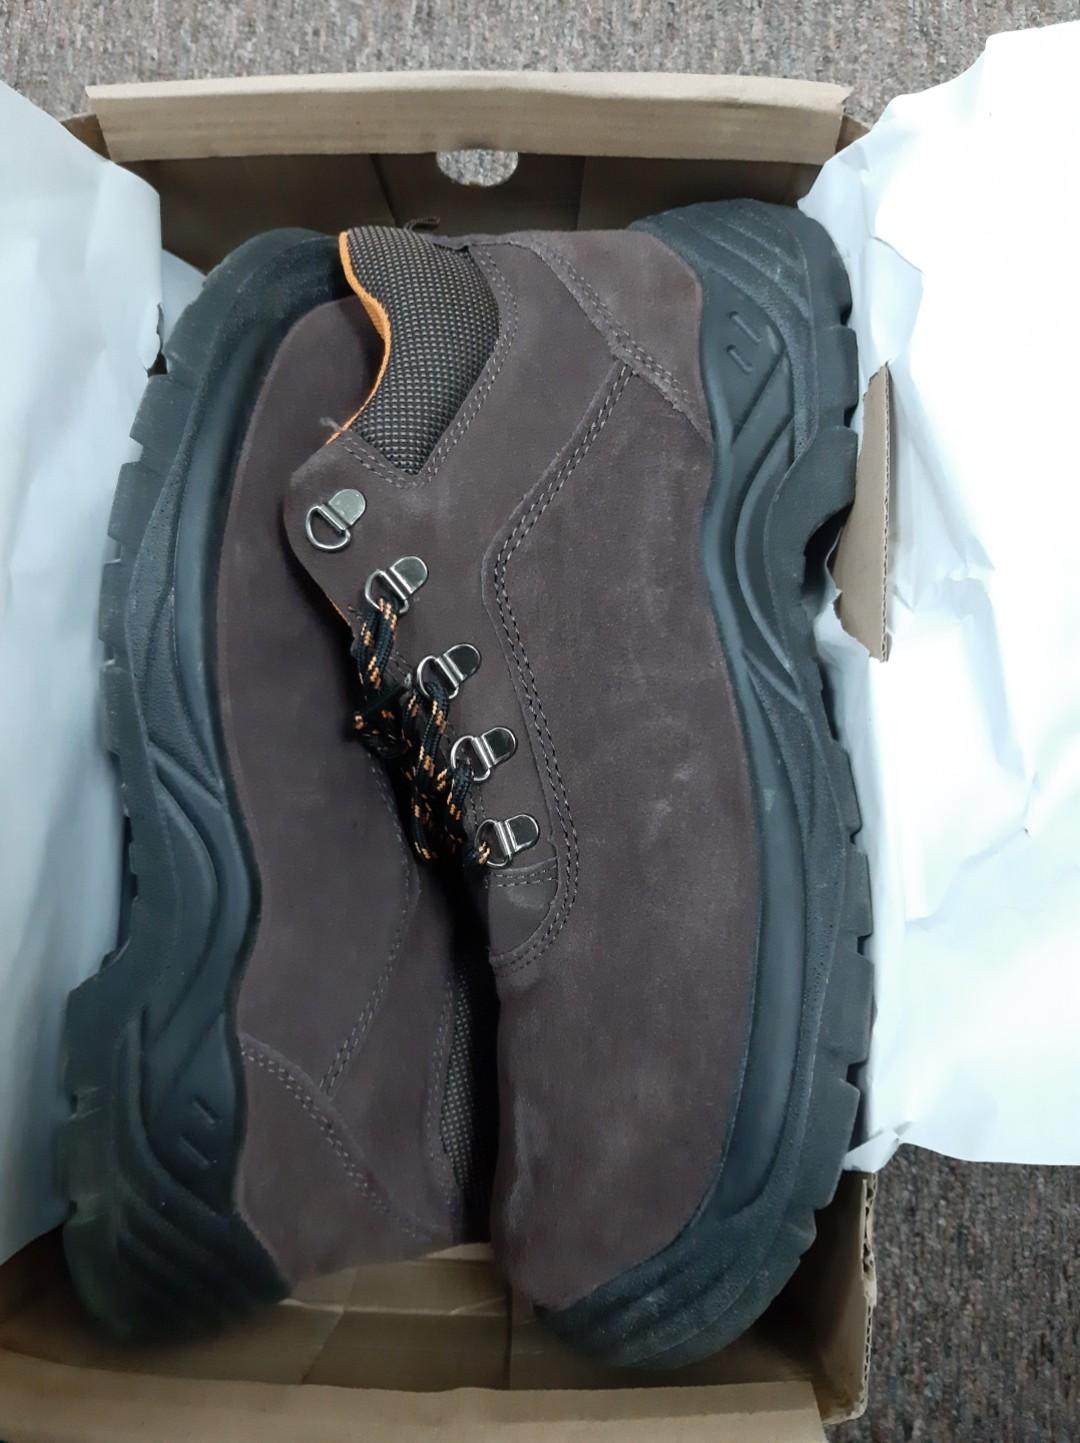 size 14 hiking boots